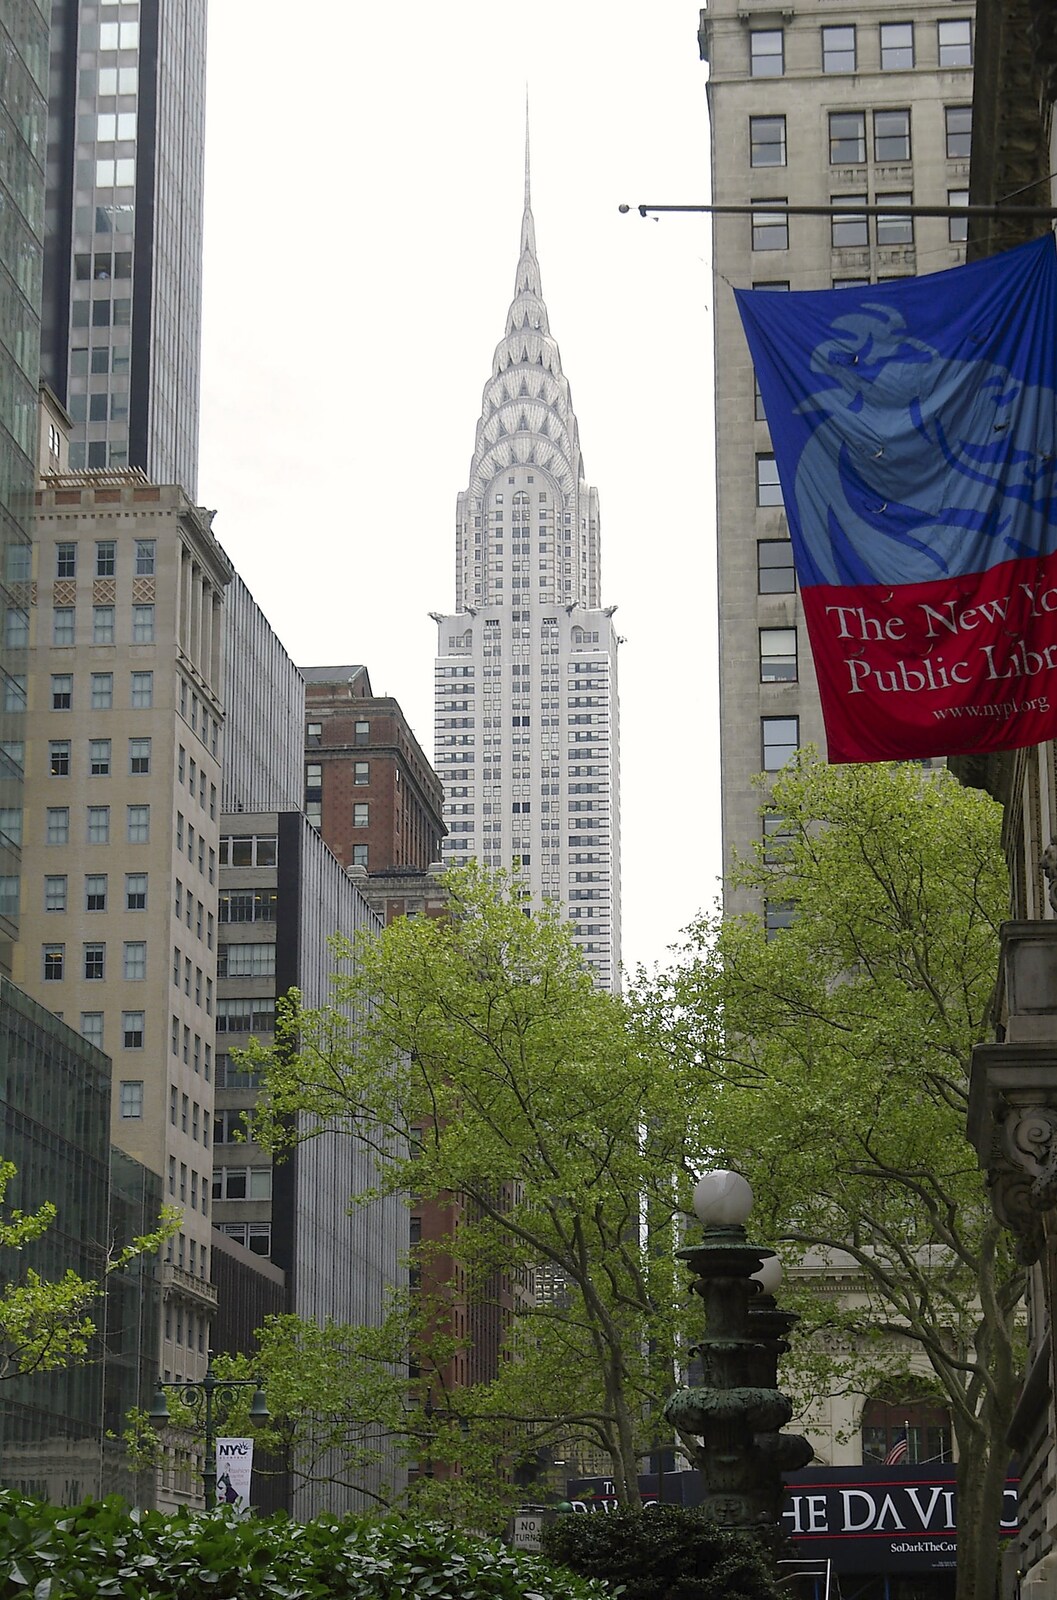 The Chrysler Building from A Union Square Demo, Bryant Park and Columbus Circle, New York, US - 2nd May 2006